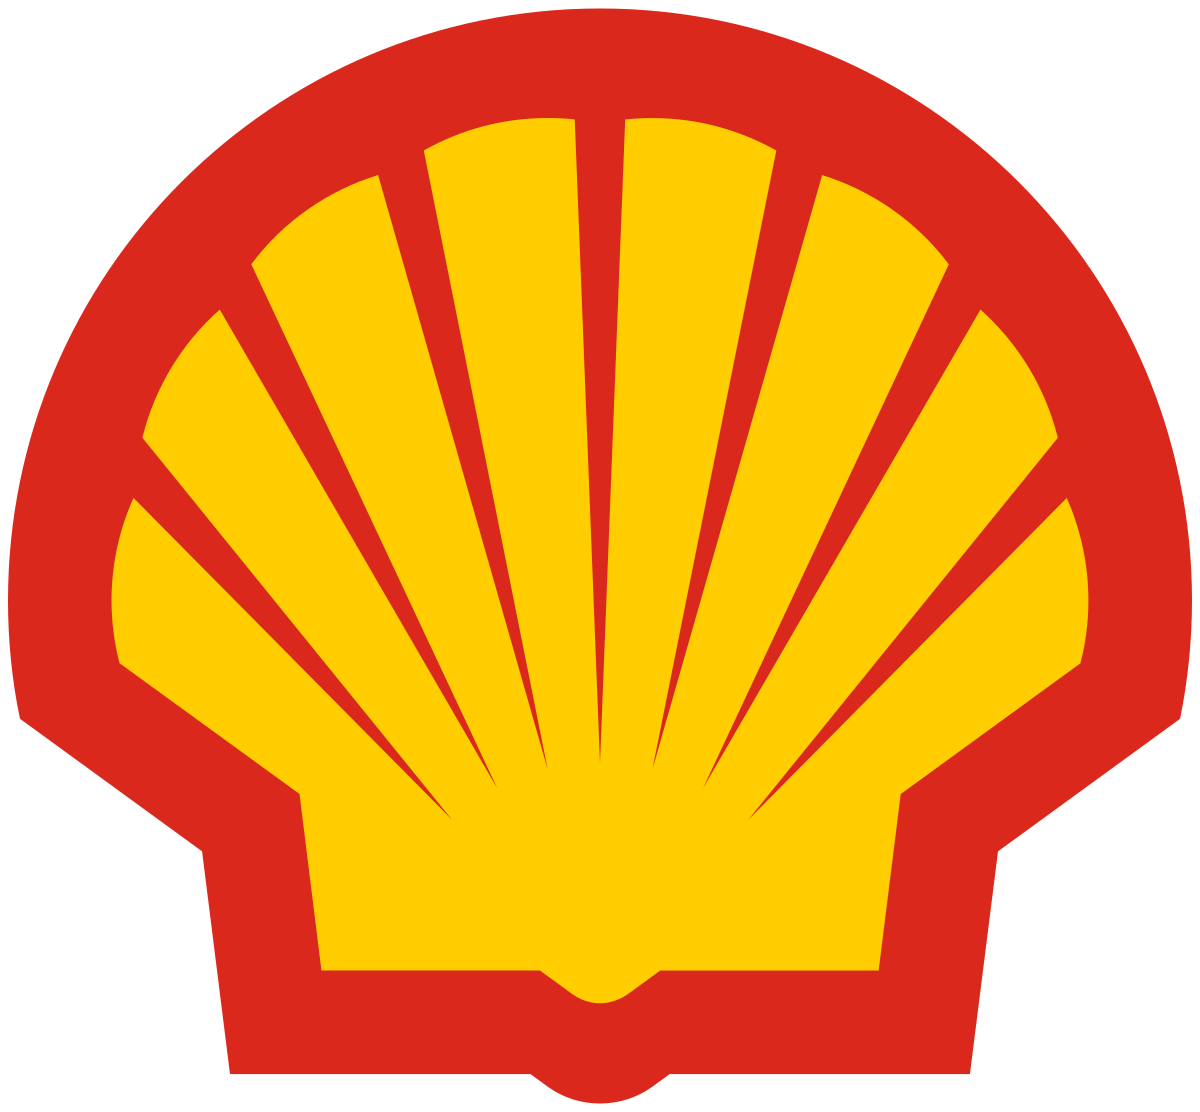 ROYAL DUTCH SHELL PLC (RUSSIAN RETAIL AND LUBRICANTS BUSINESS)